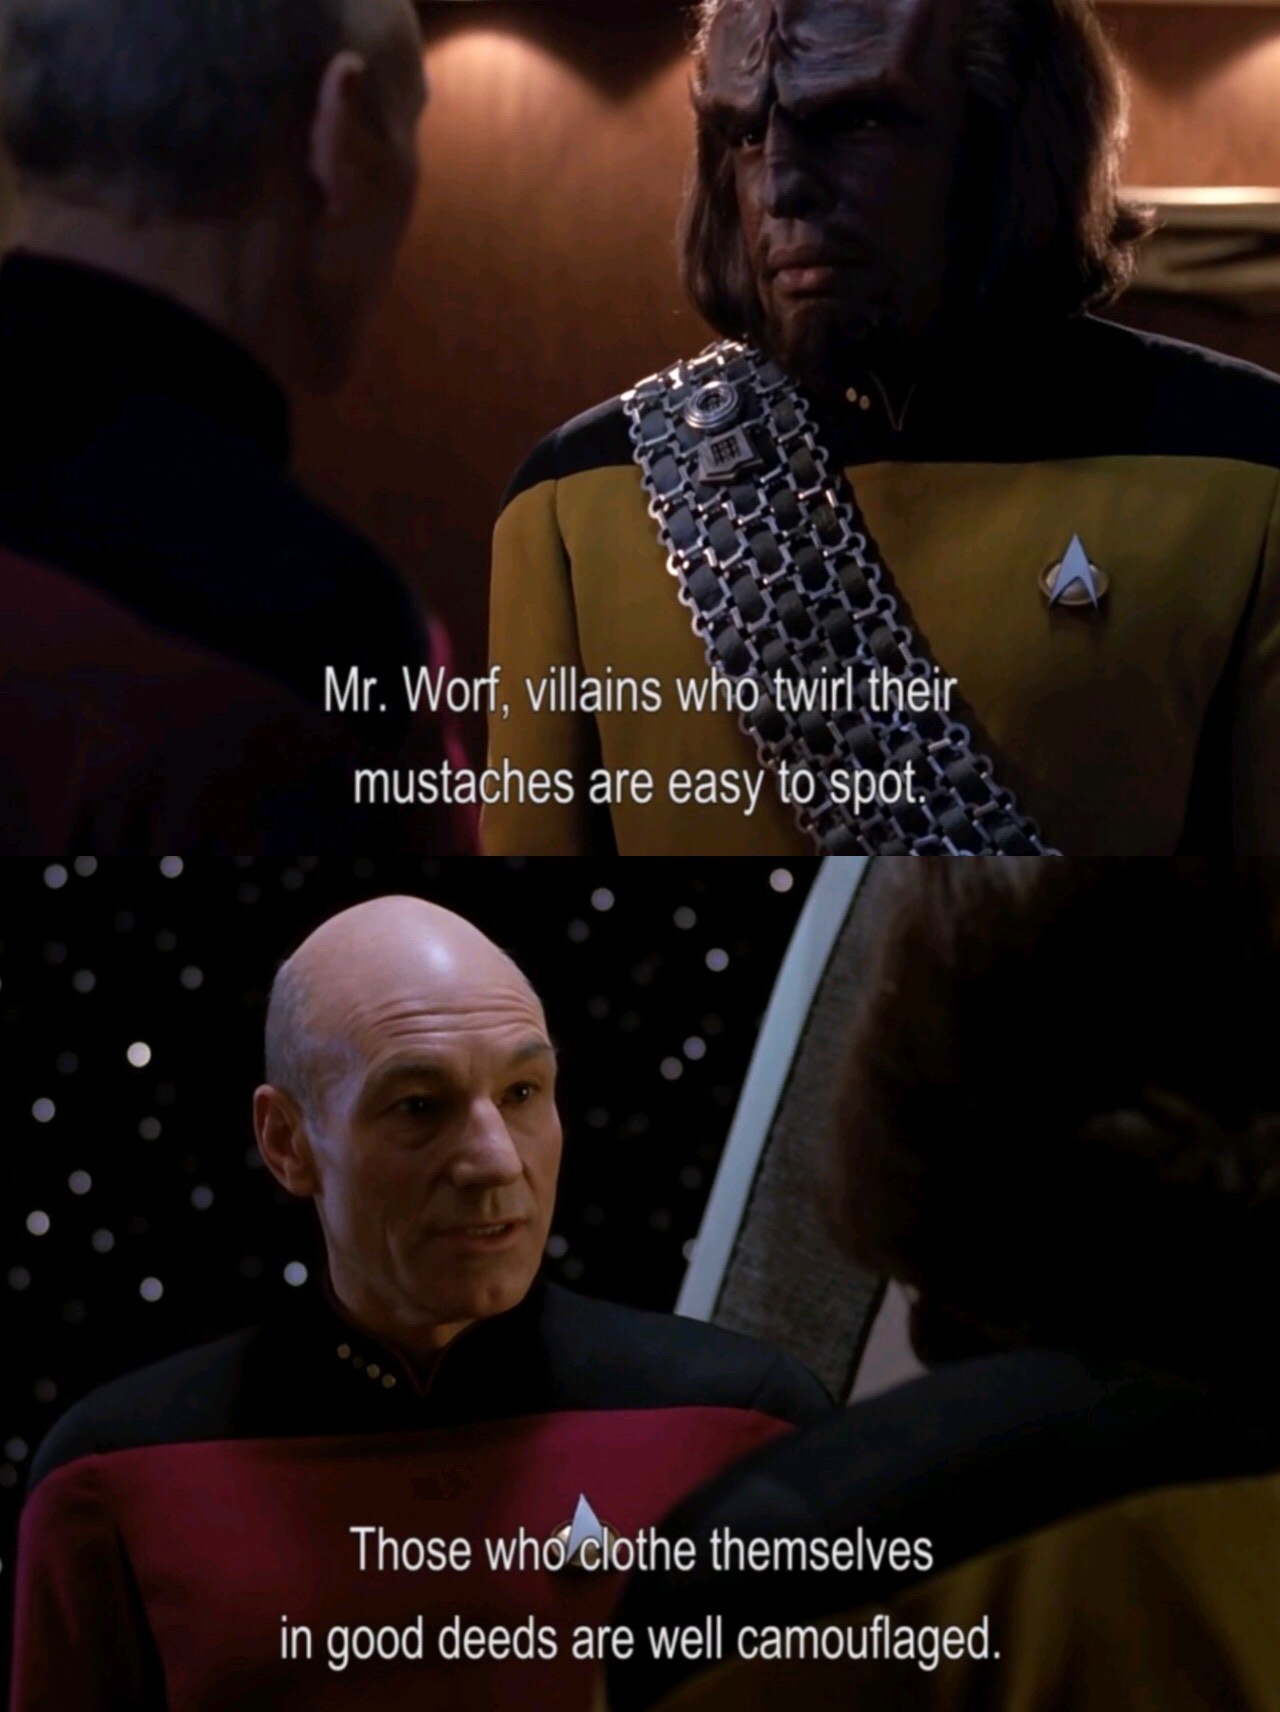 photo caption - Re Mr. Worf, villains who twirl their mustaches are easy to spot. Those who clothe themselves in good deeds are well camouflaged.